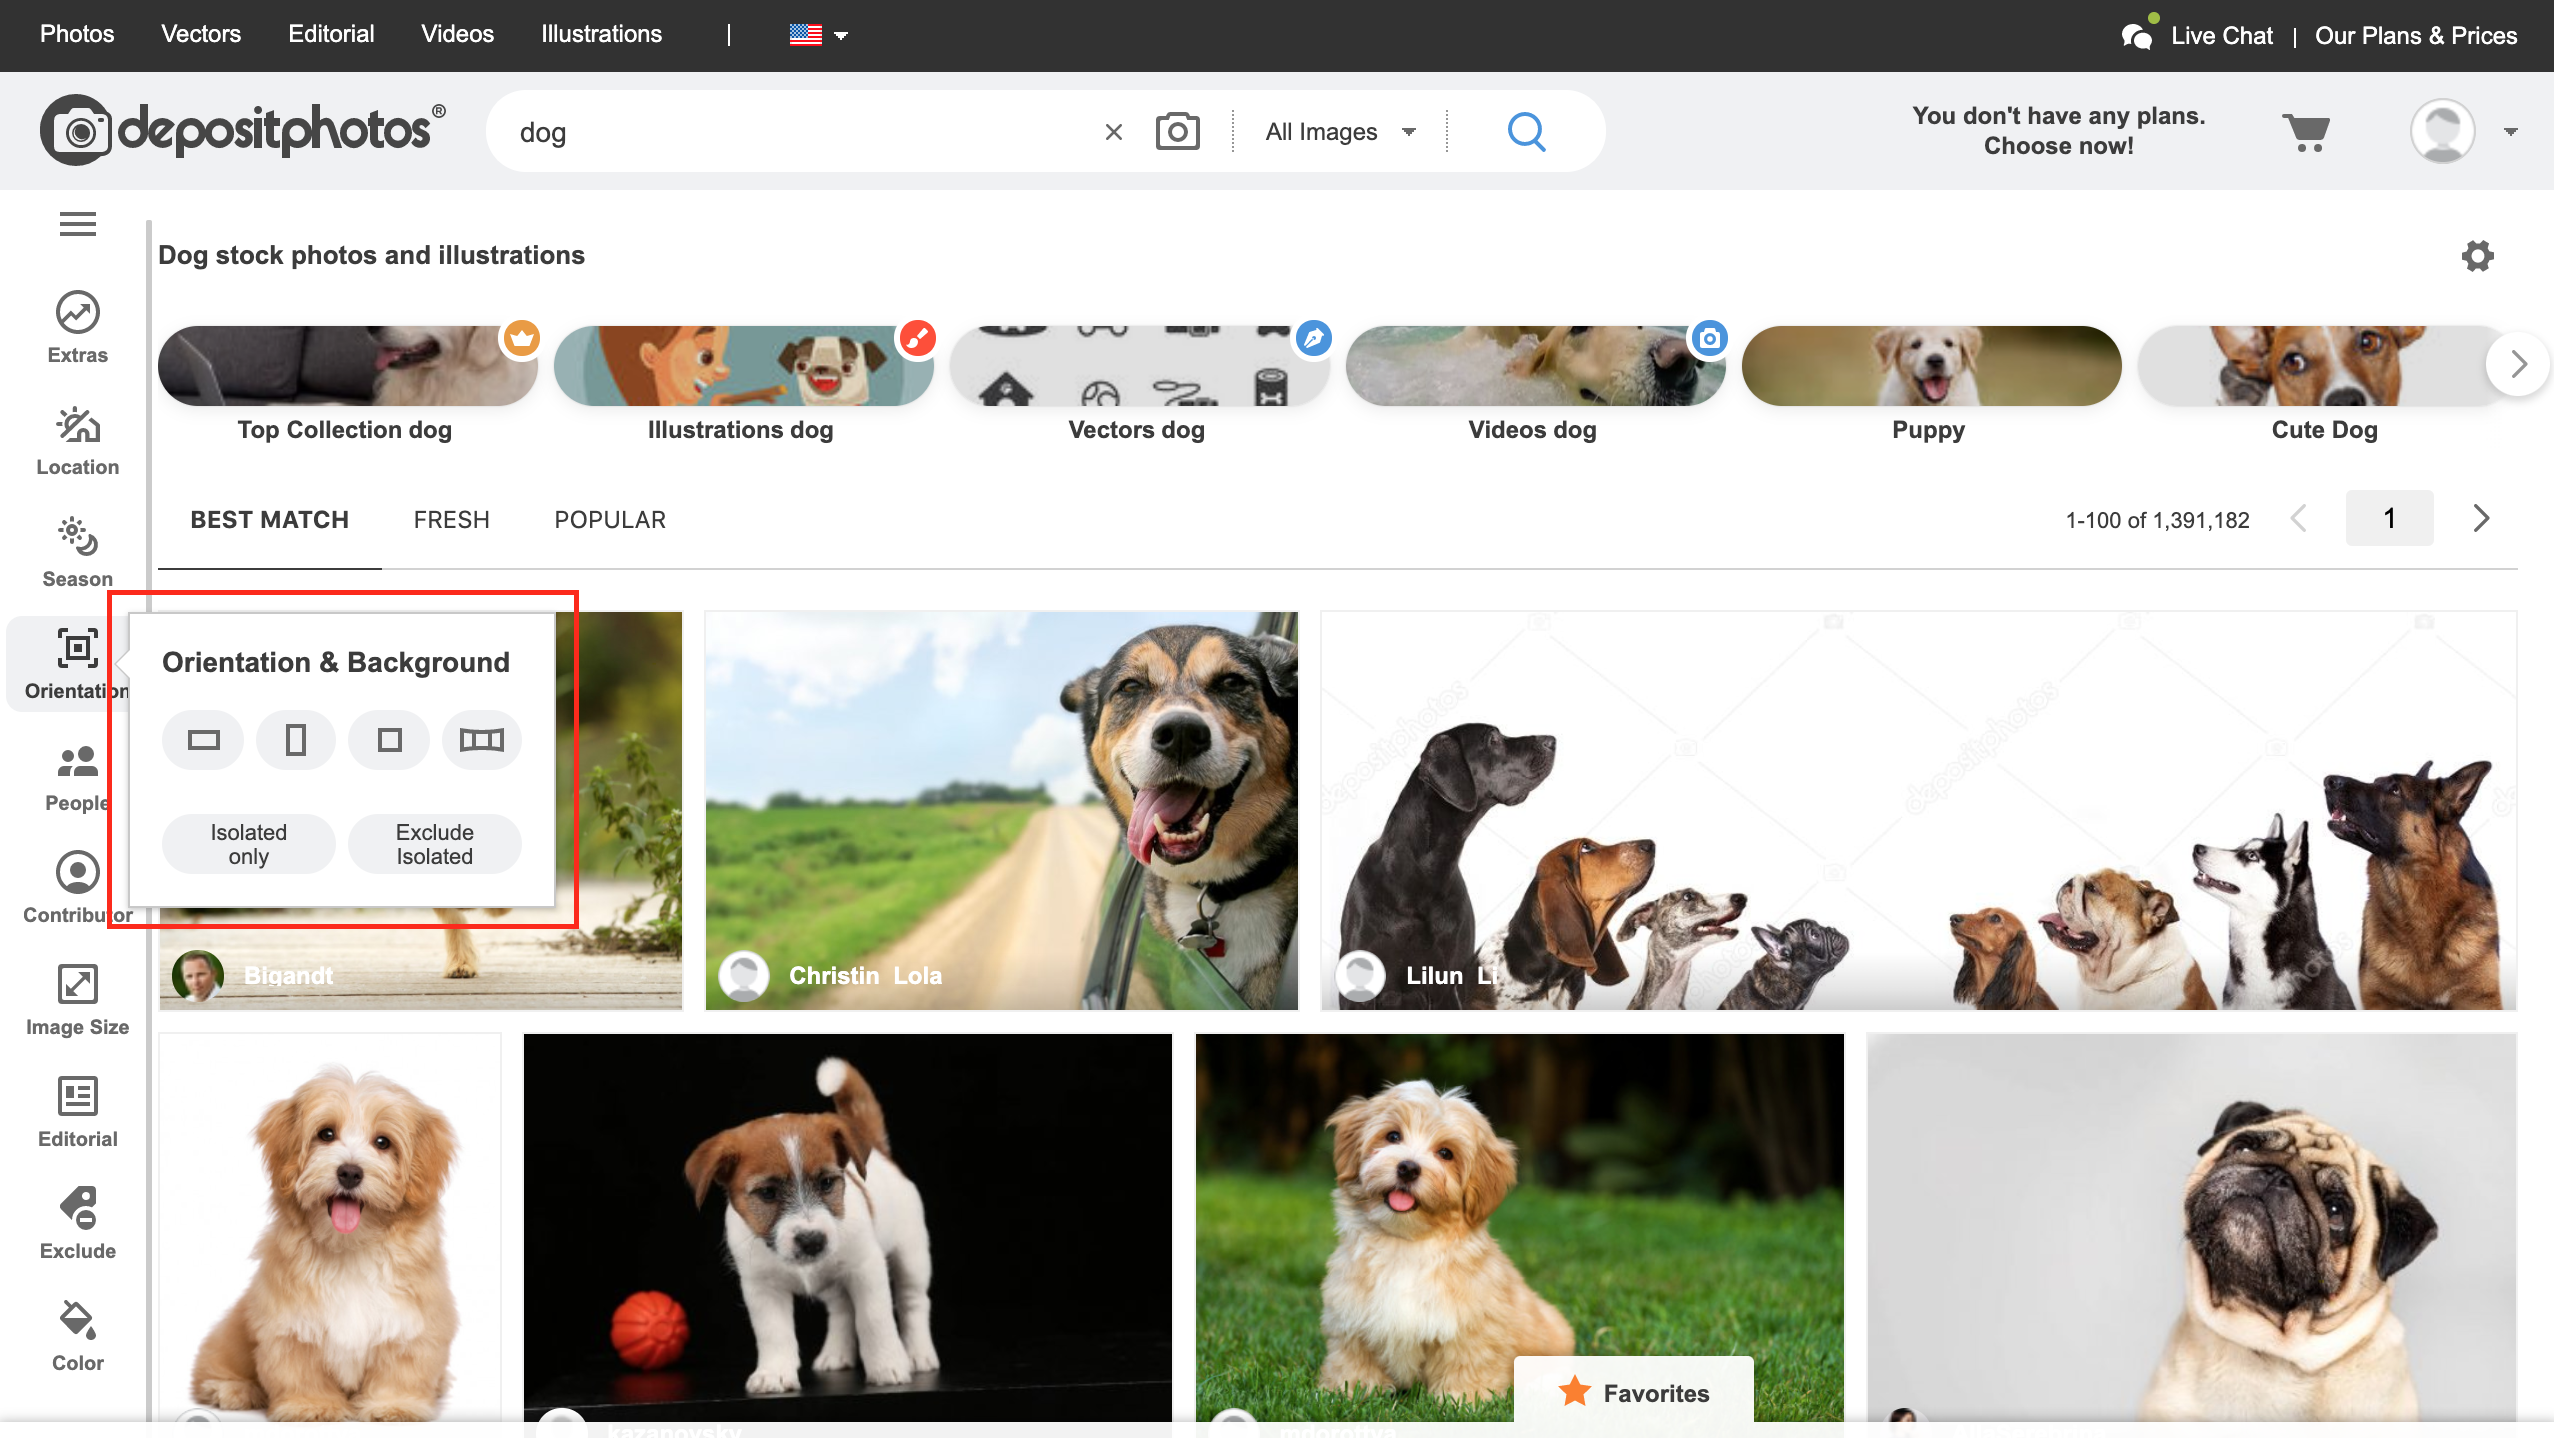 Your Complete Guide to Depositphotos Search In 2020